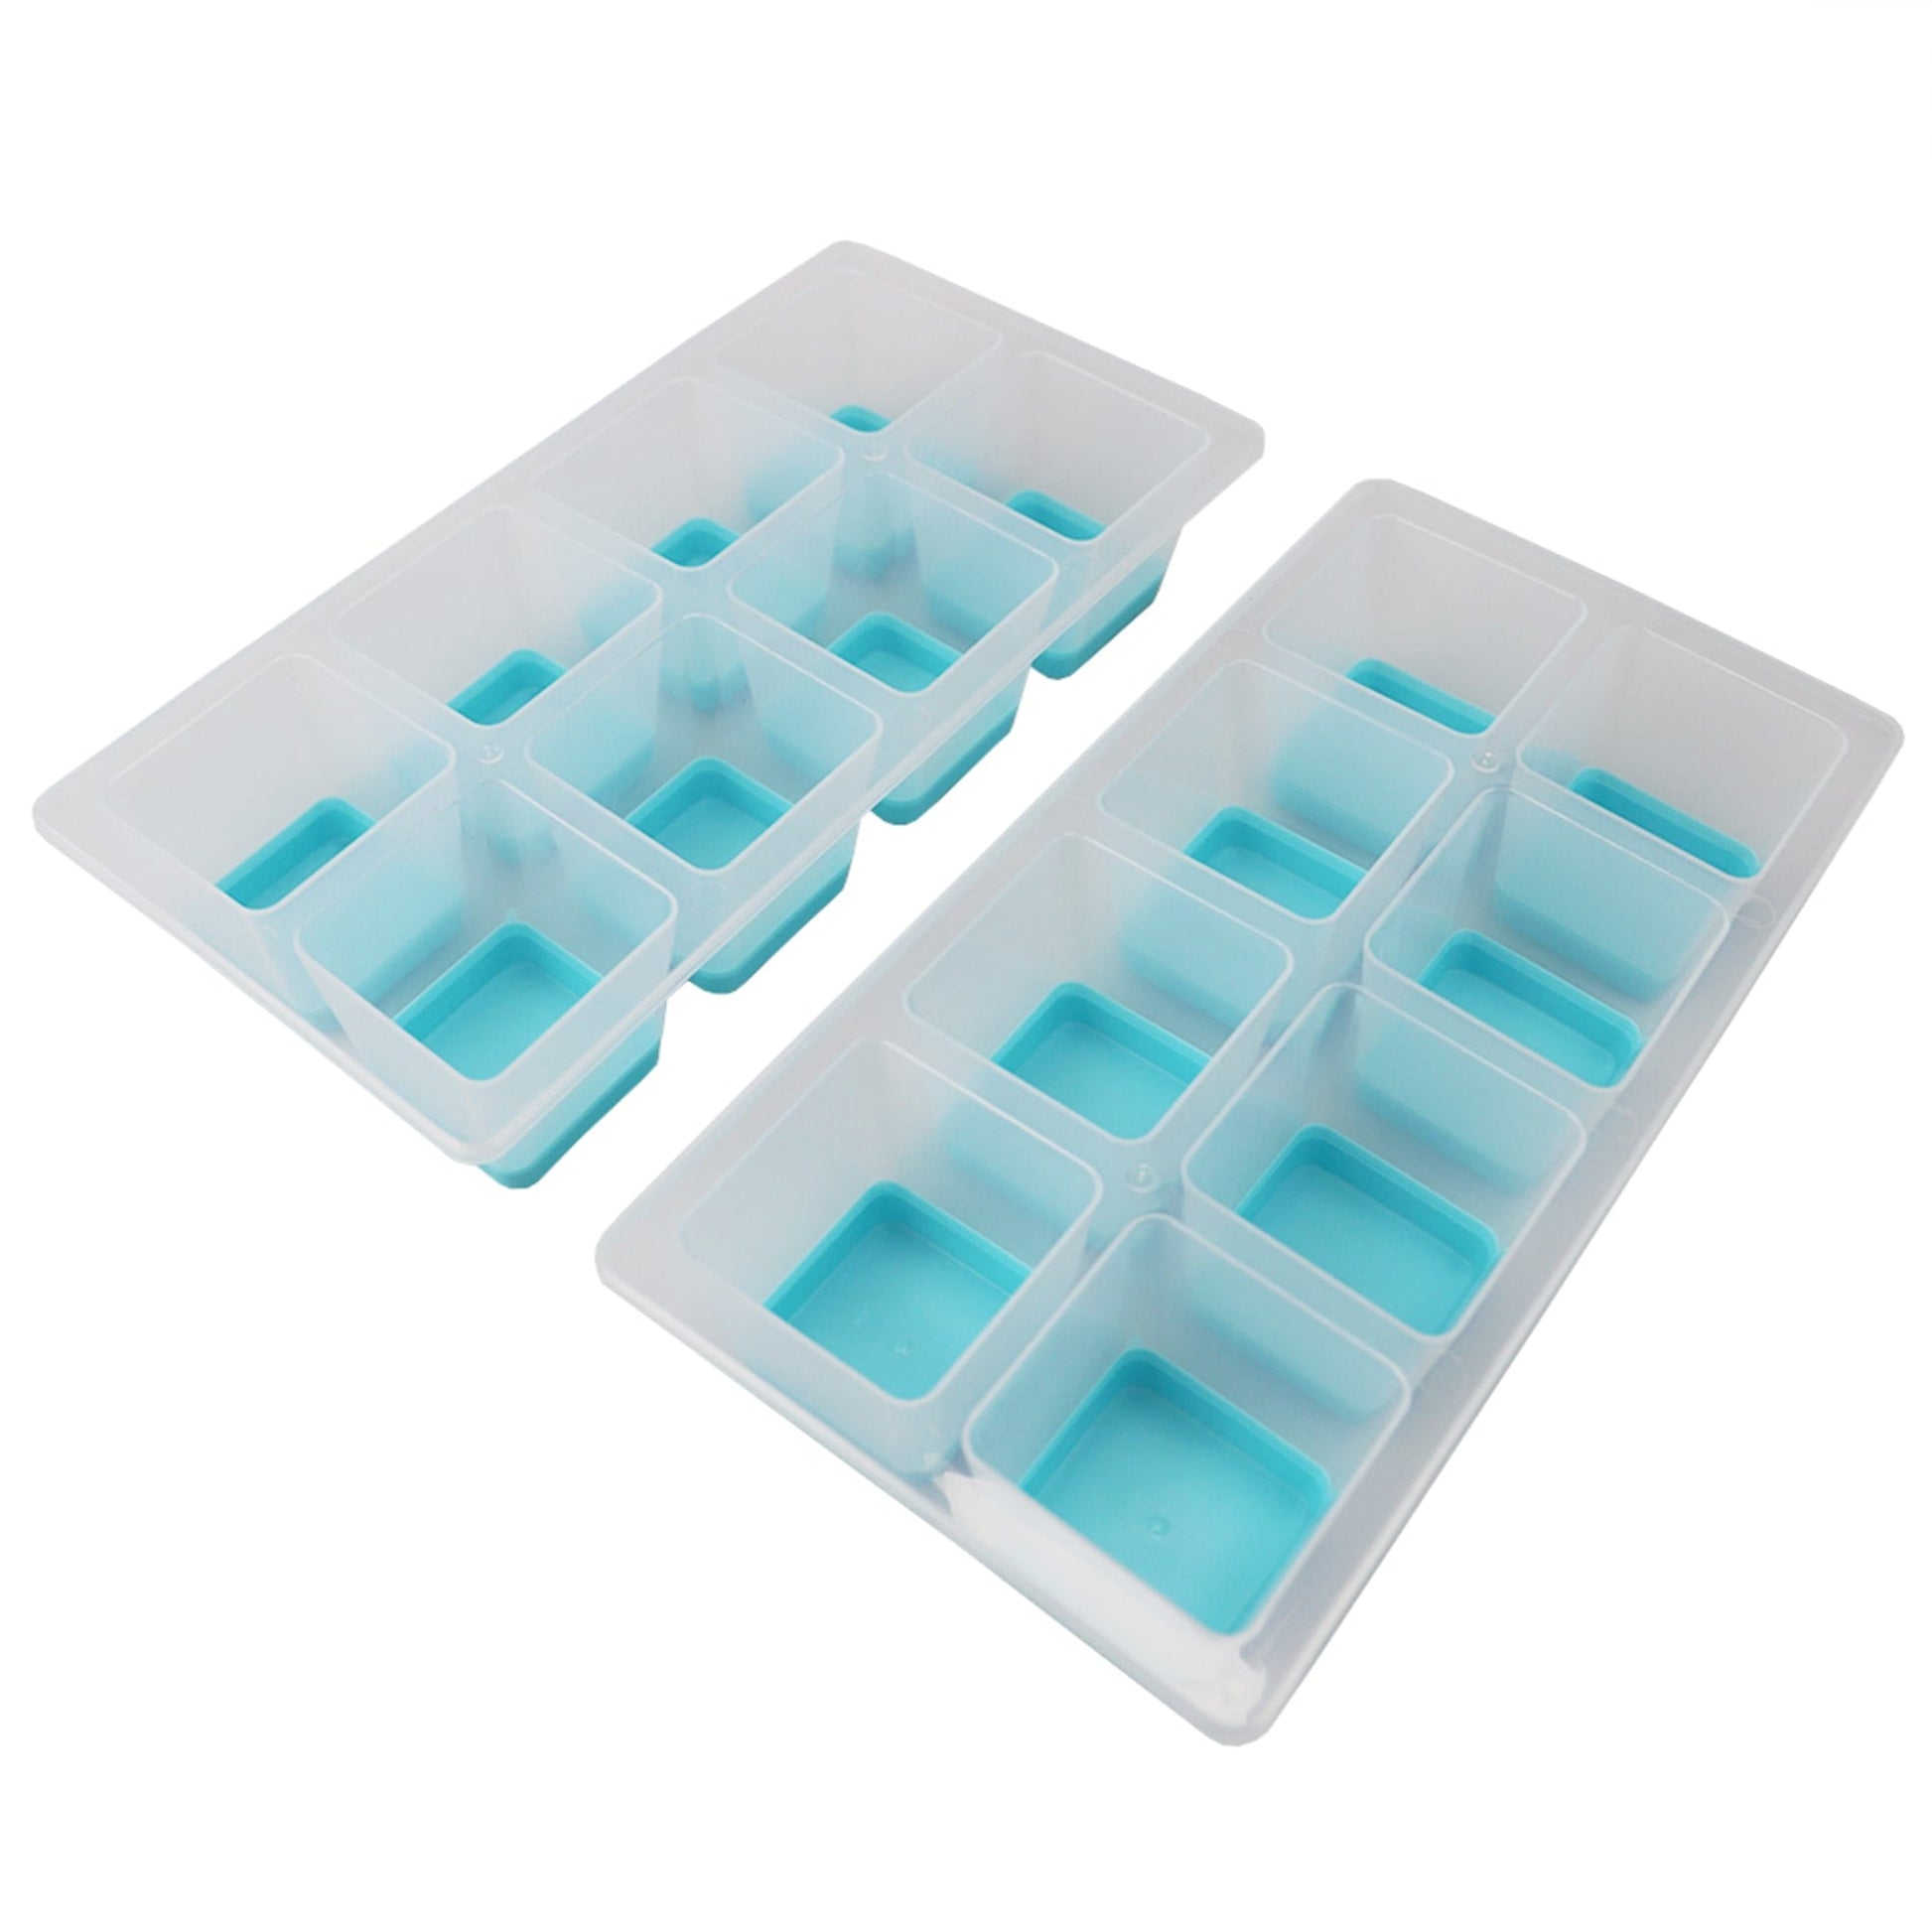 Handy Housewares 2 Jumbo Silicone Push Ice Cube Tray - Makes 8 Large Cubes  - Teal Green